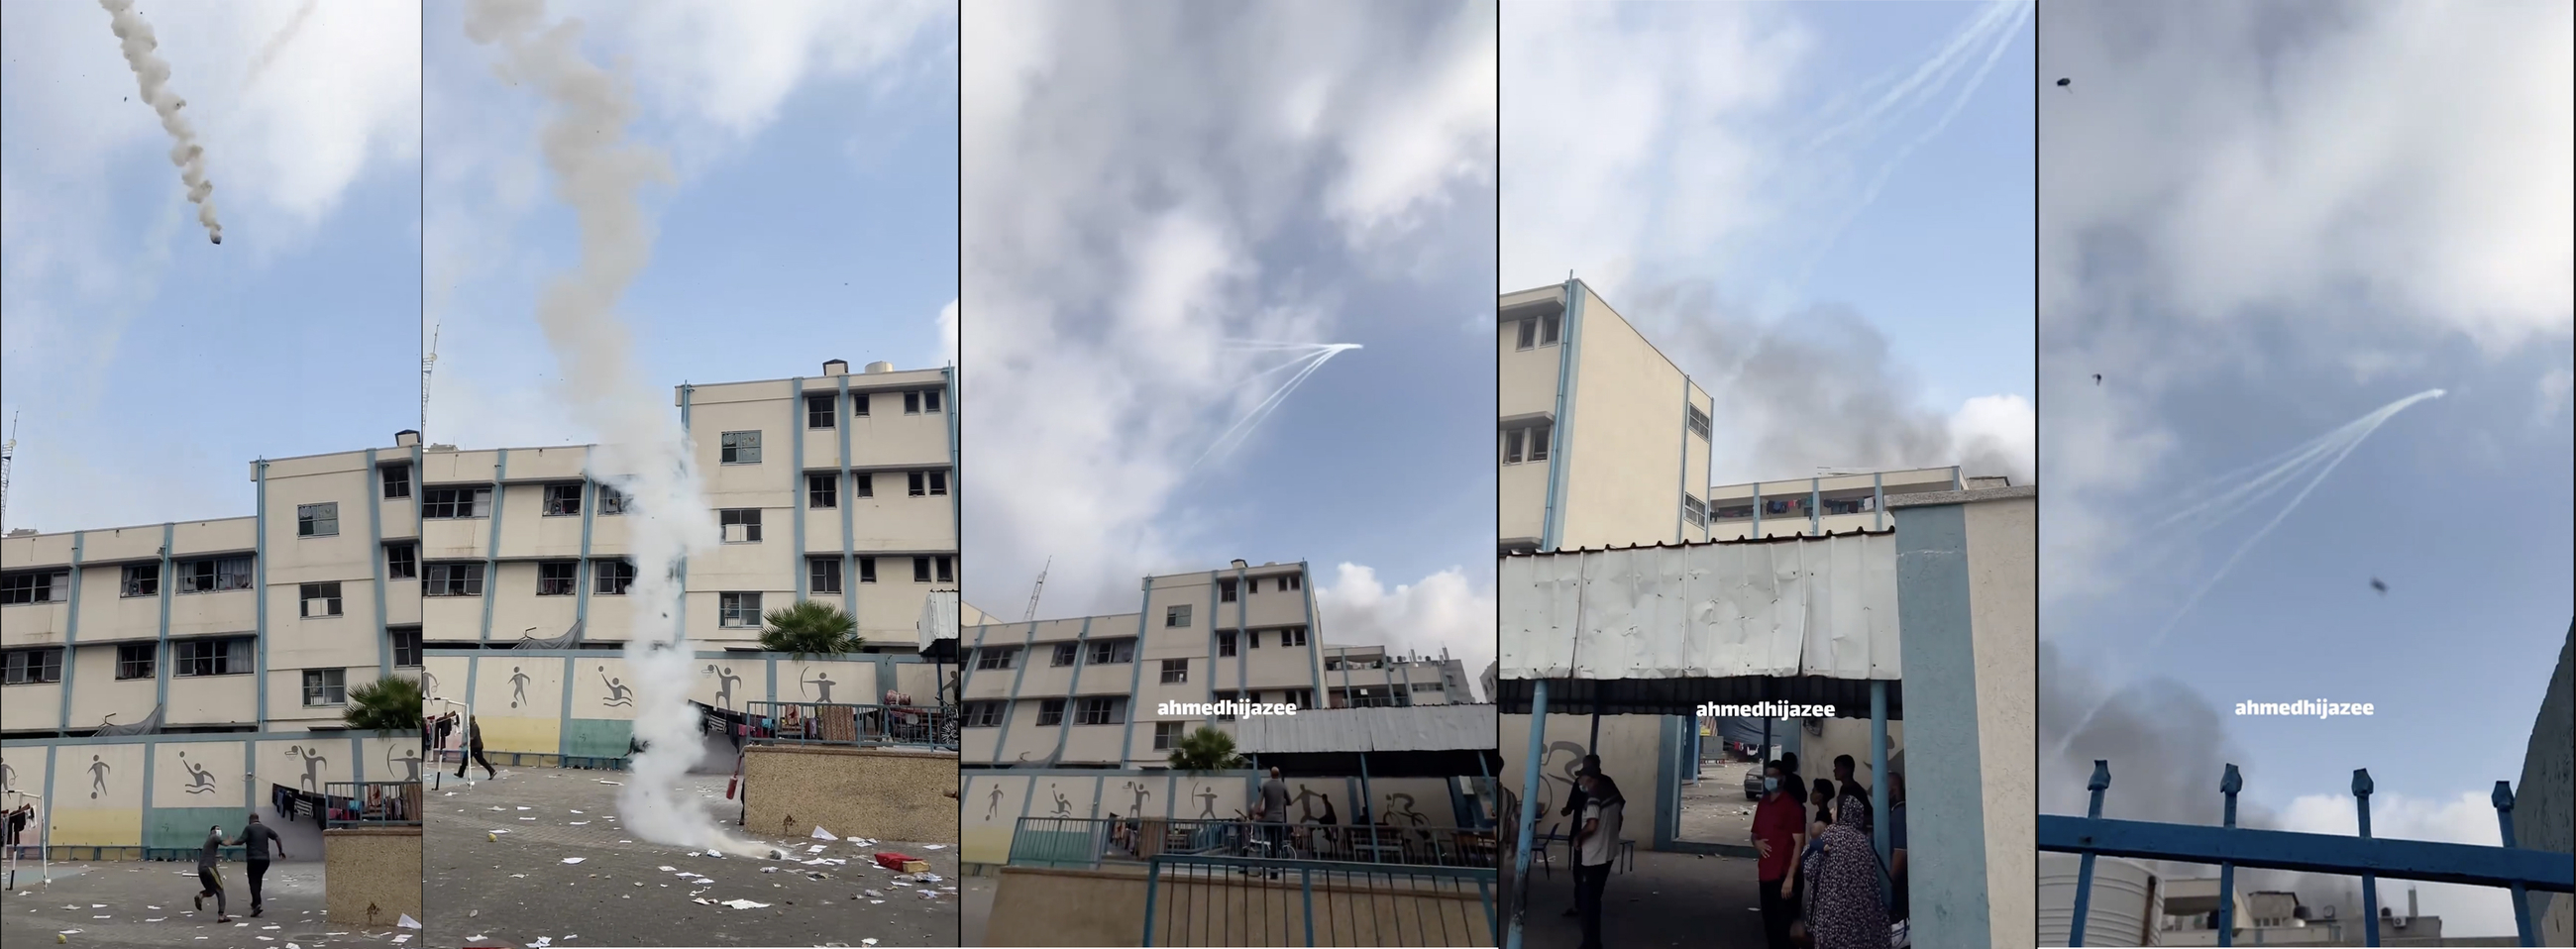 Screenshots from a journalist's video showing phosphorus bombs falling in a school in Gaza.